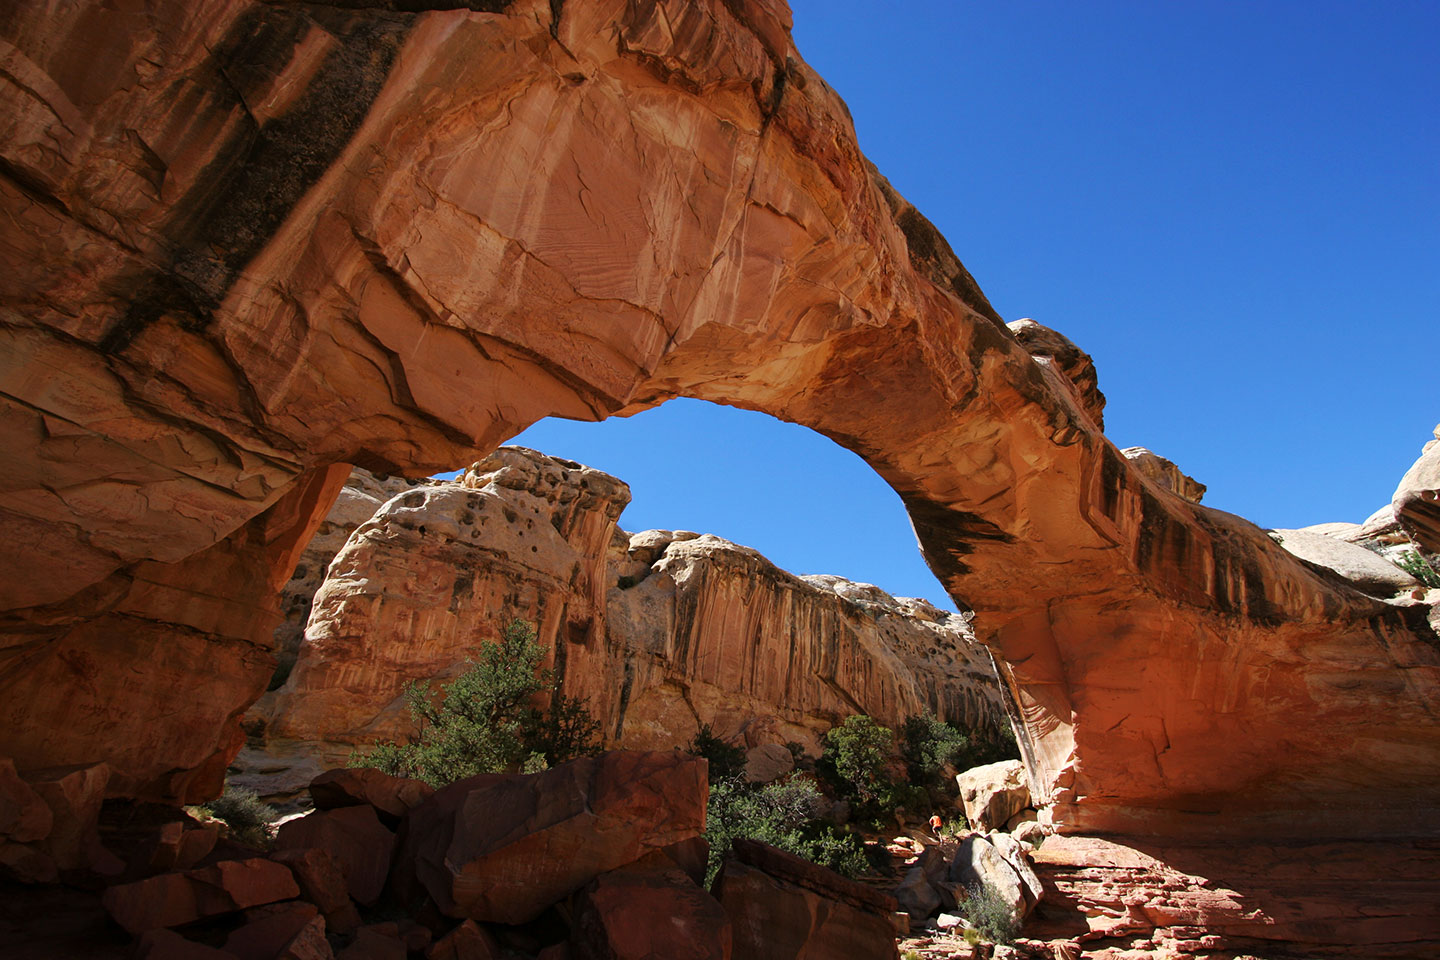 Arch formation in Arches National Park, Utah